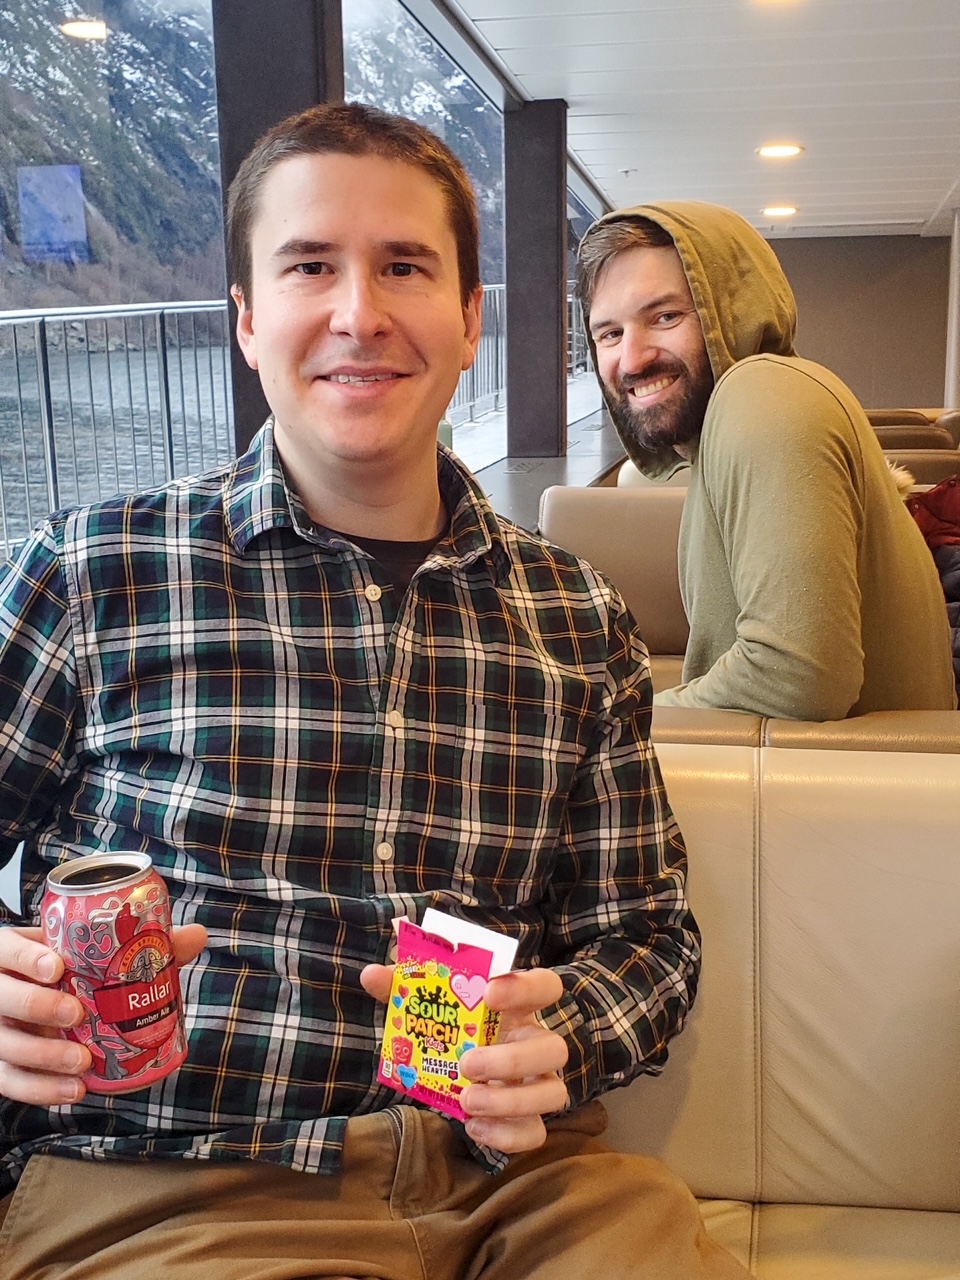 Ryan & Tim enjoying some beers and candy on the fjord cruise to Flam